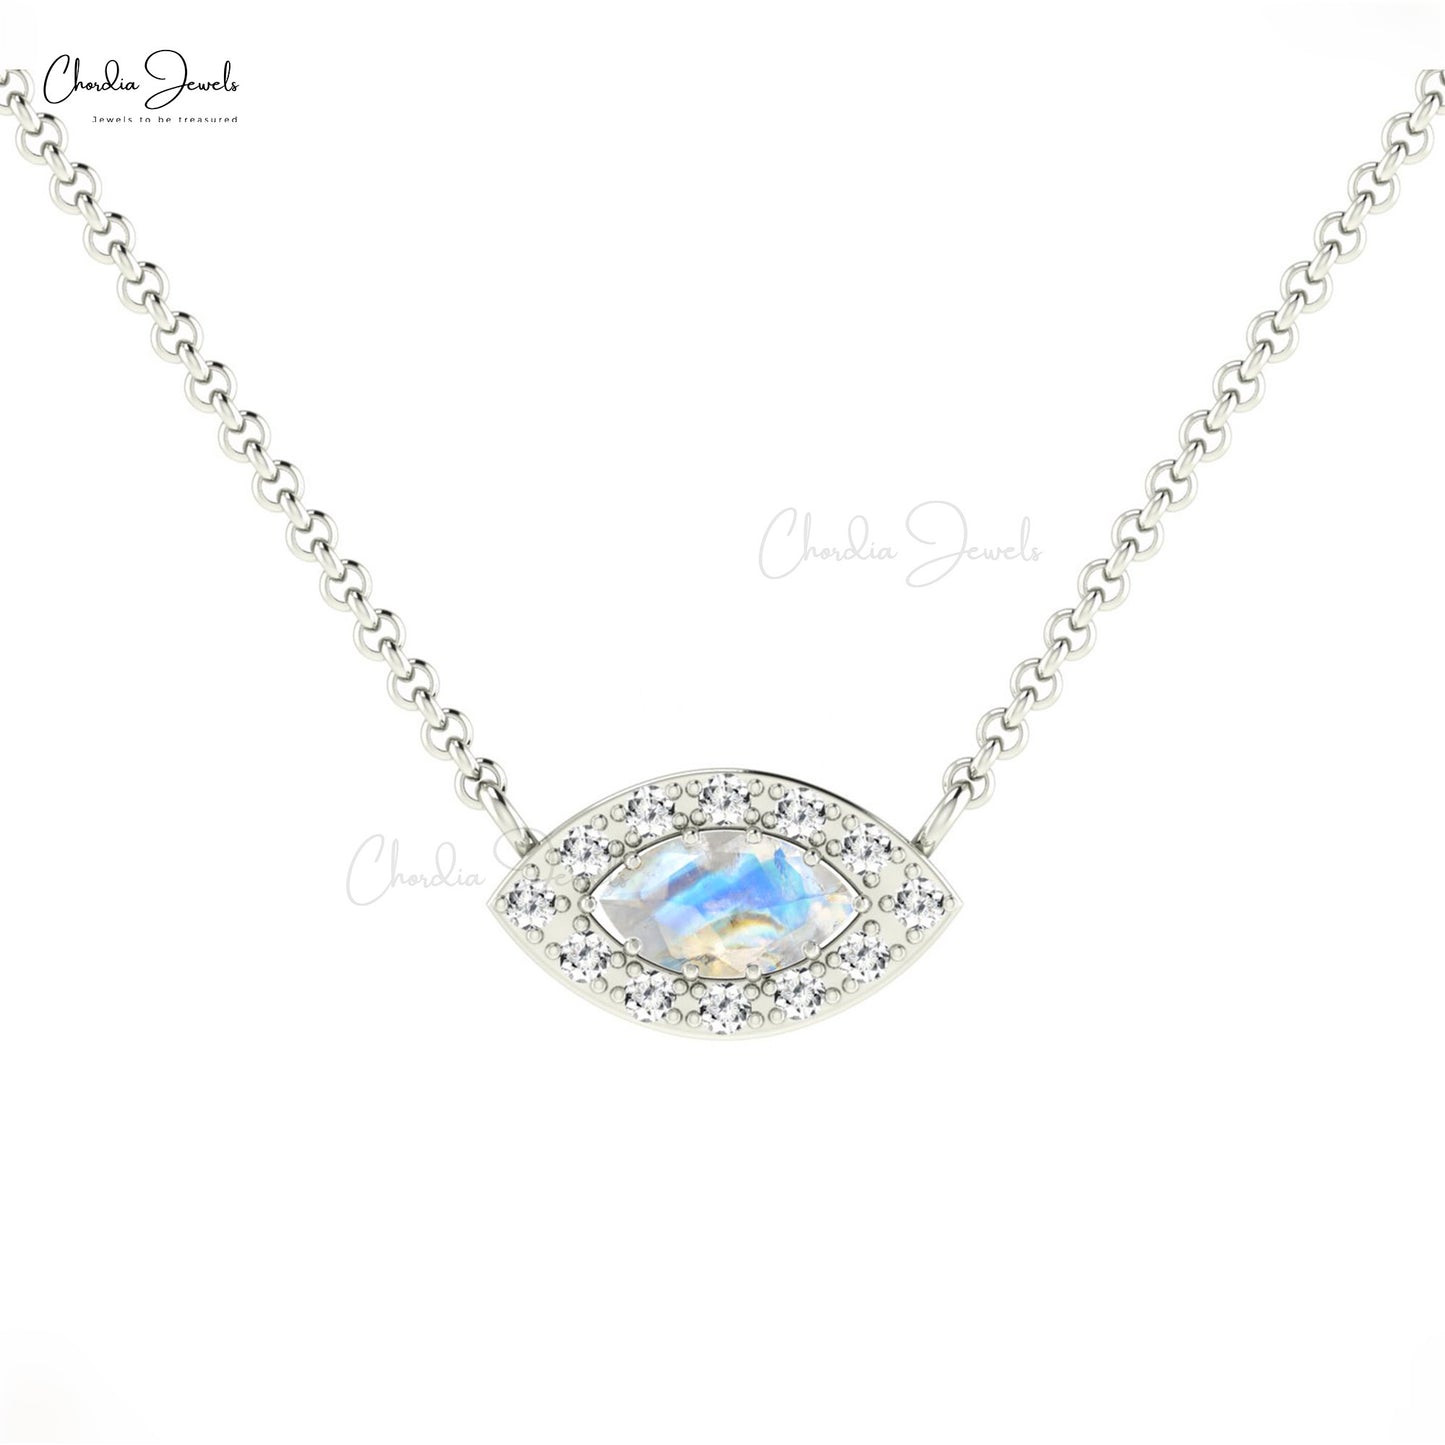 Load image into Gallery viewer, Rainbow Moonstone Necklace
